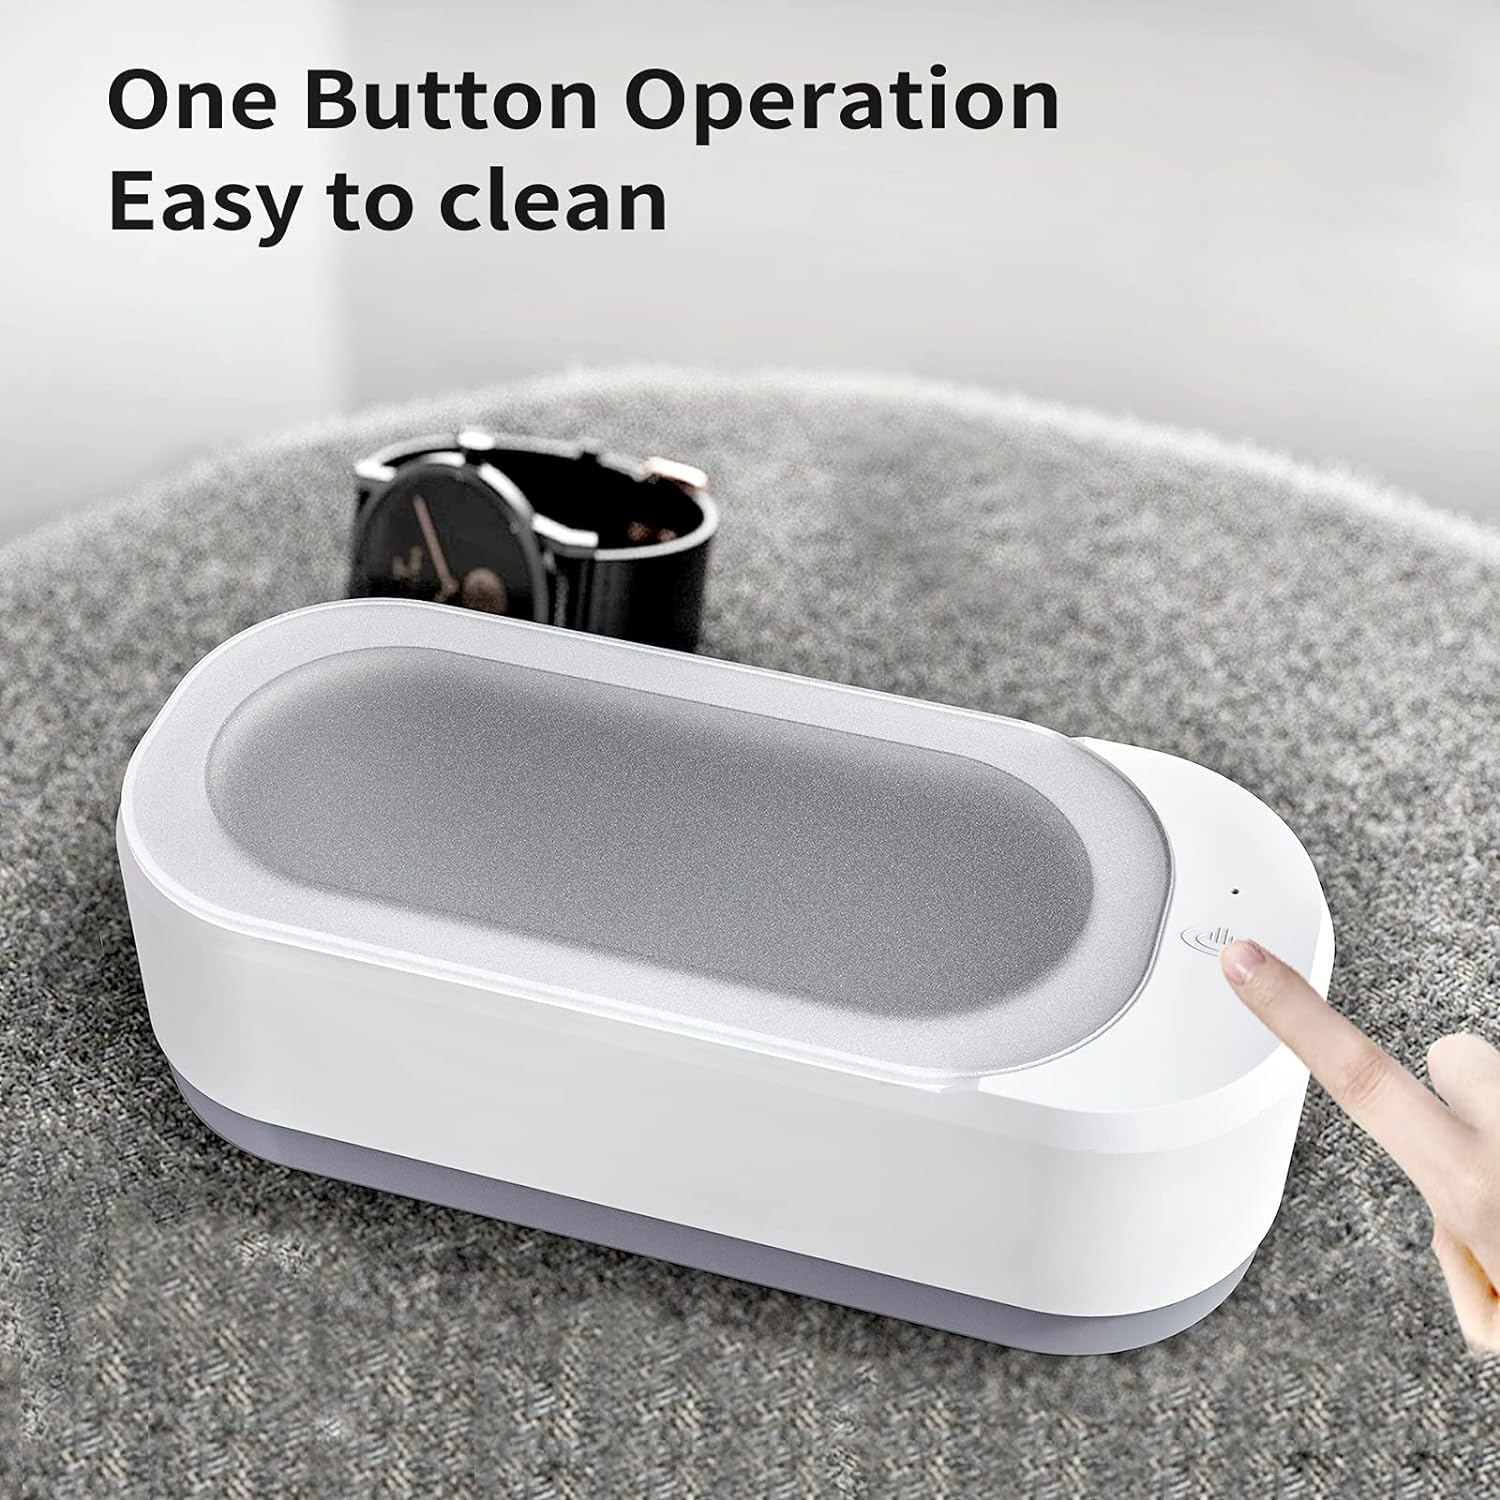 Ultrasonic Jewelry Cleaner, Jewelry Cleaner Machine with 12OZ, Professional Sonic Cleaner with One-Touch Operation, Ultrasonic Cleaner for Rings, Glasses, Jewelry, Dentures-4352